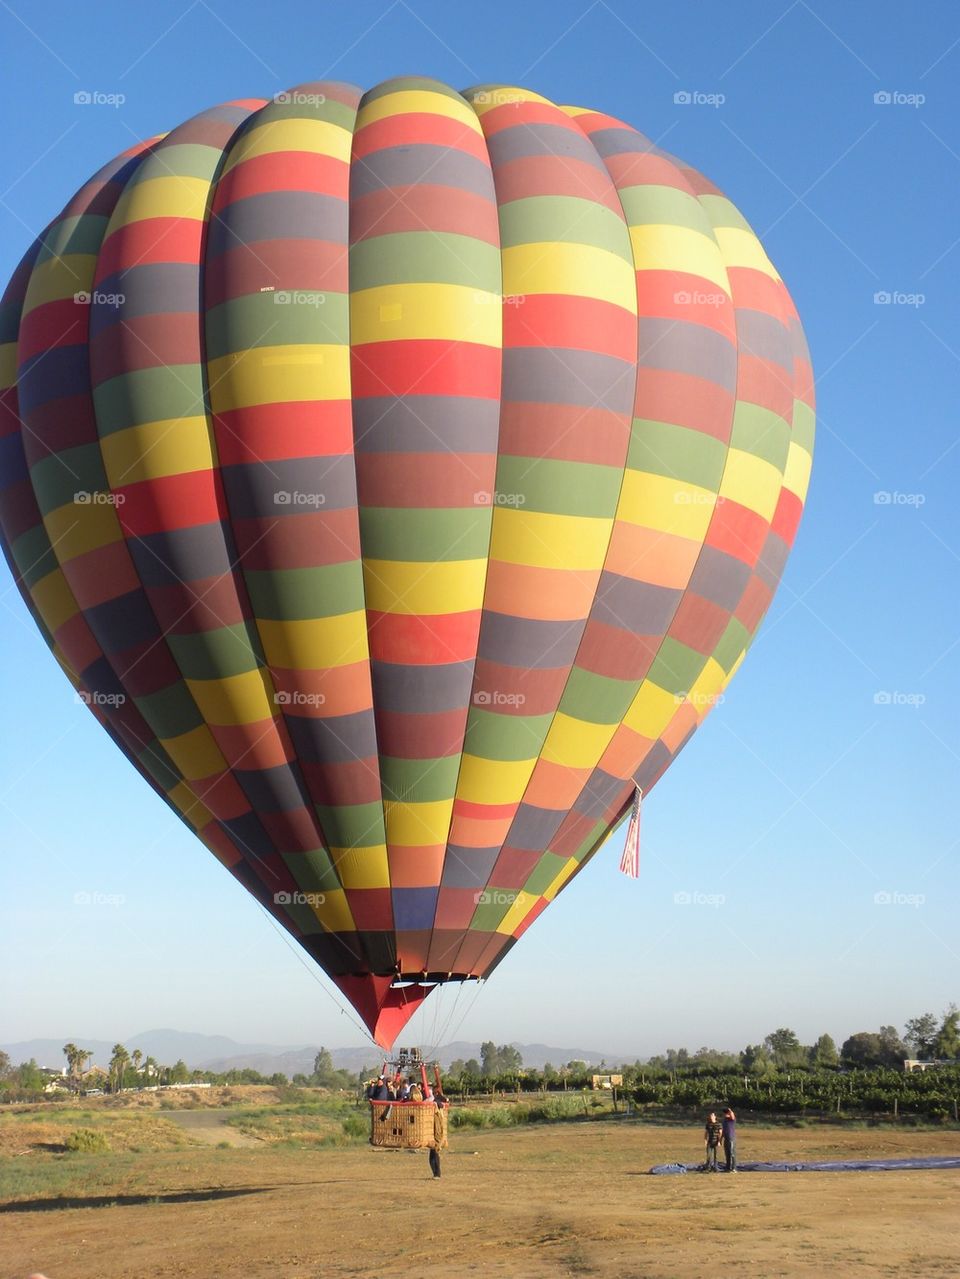 Colorful hot air balloon flying over the landscape